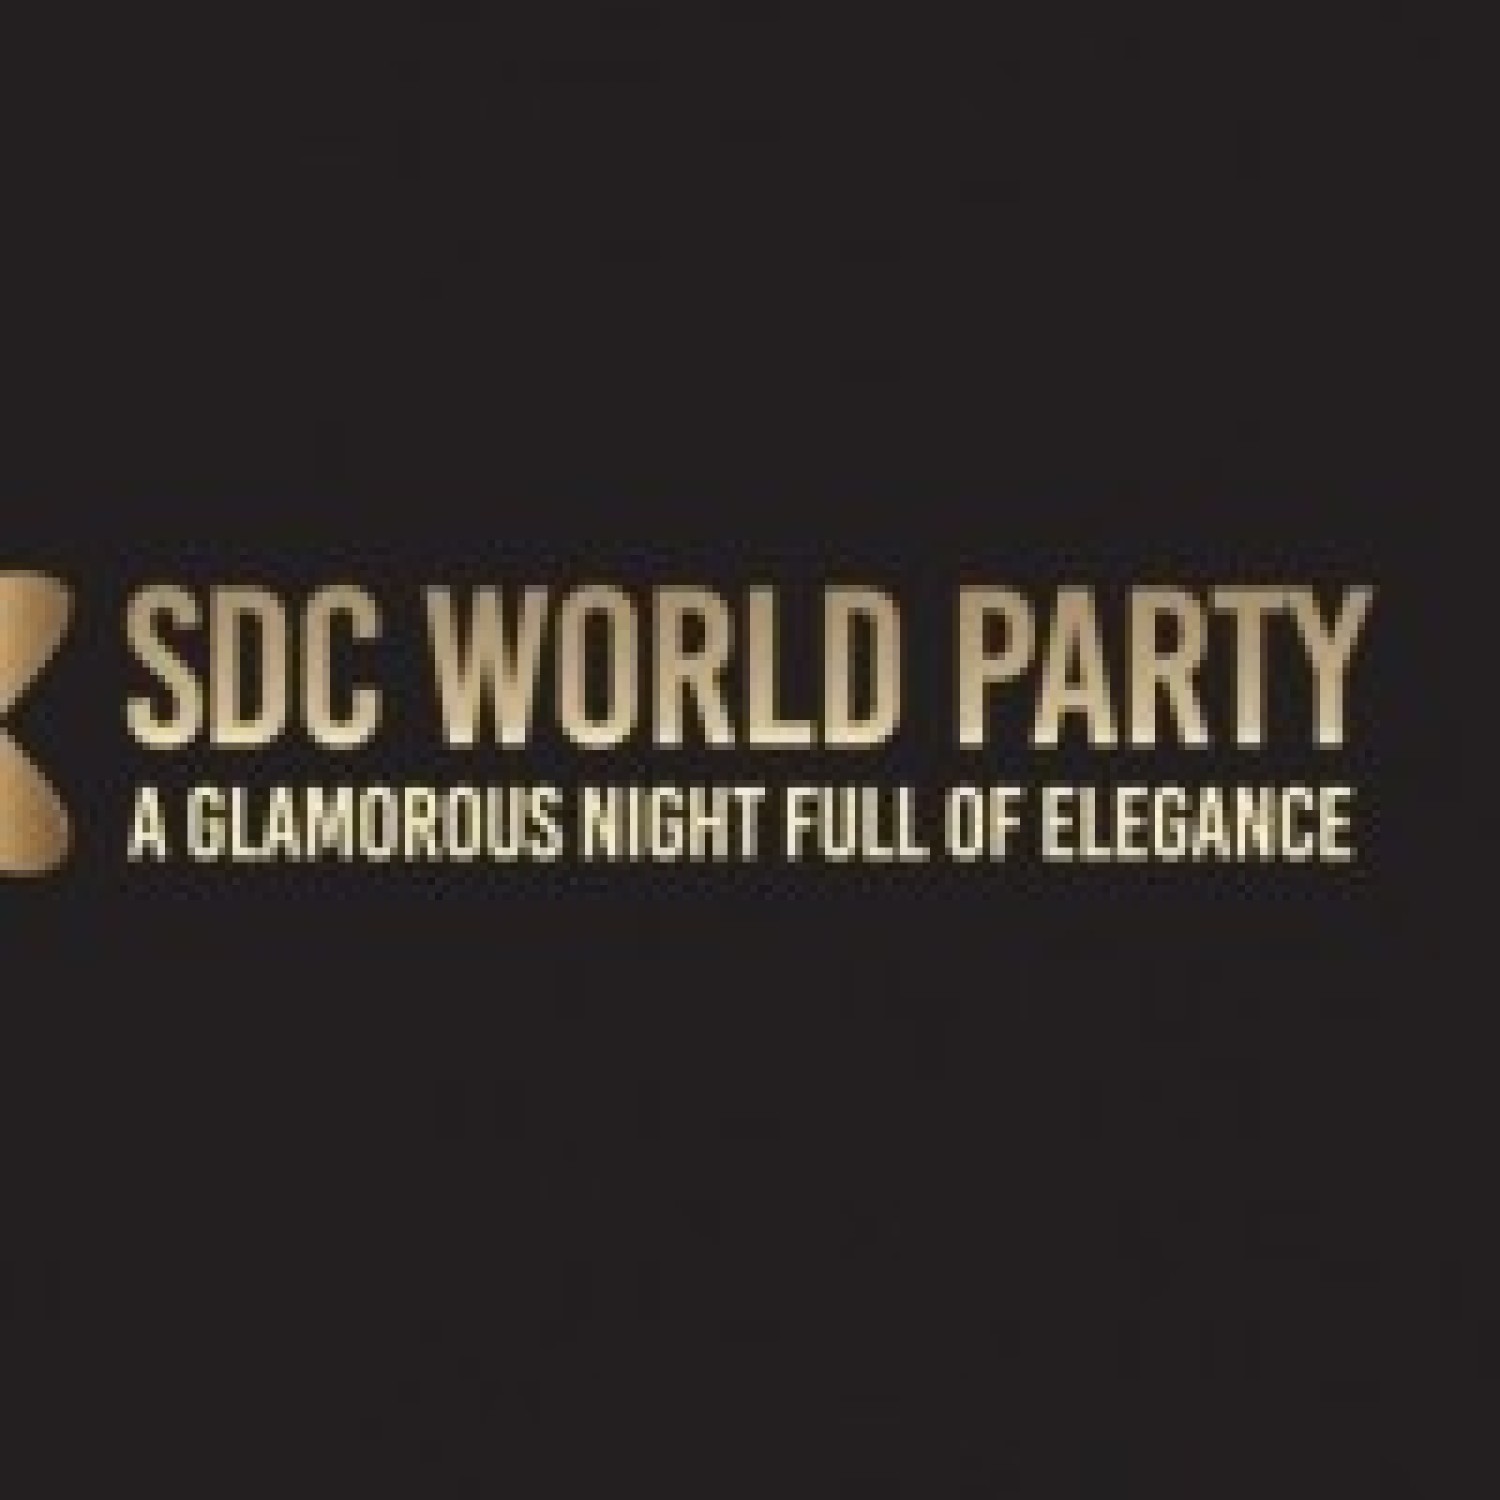 SDC World Party